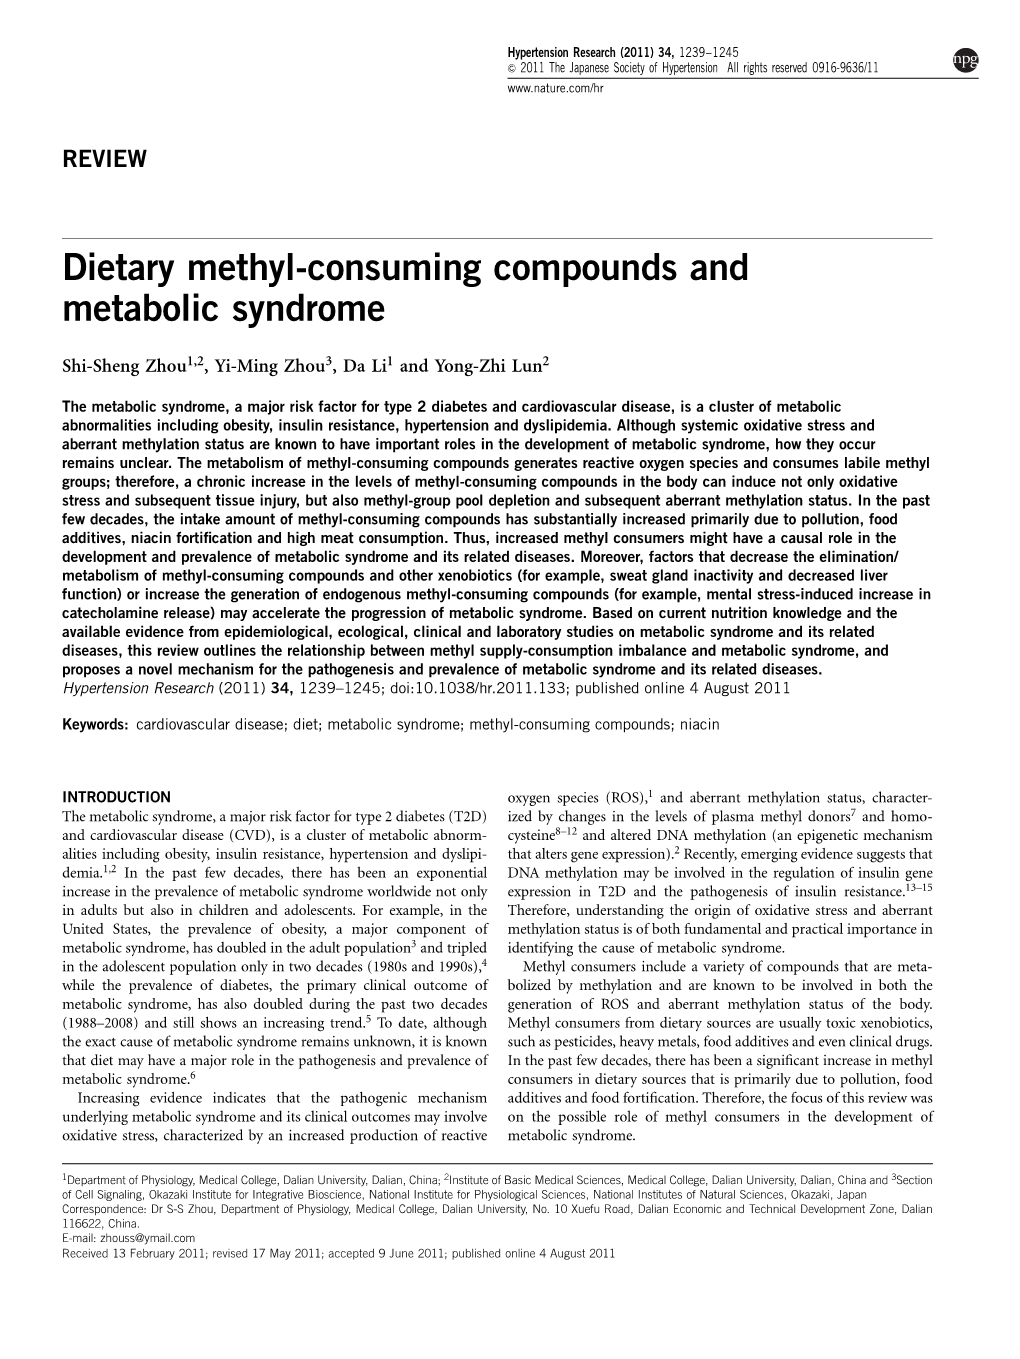 Dietary Methyl-Consuming Compounds and Metabolic Syndrome